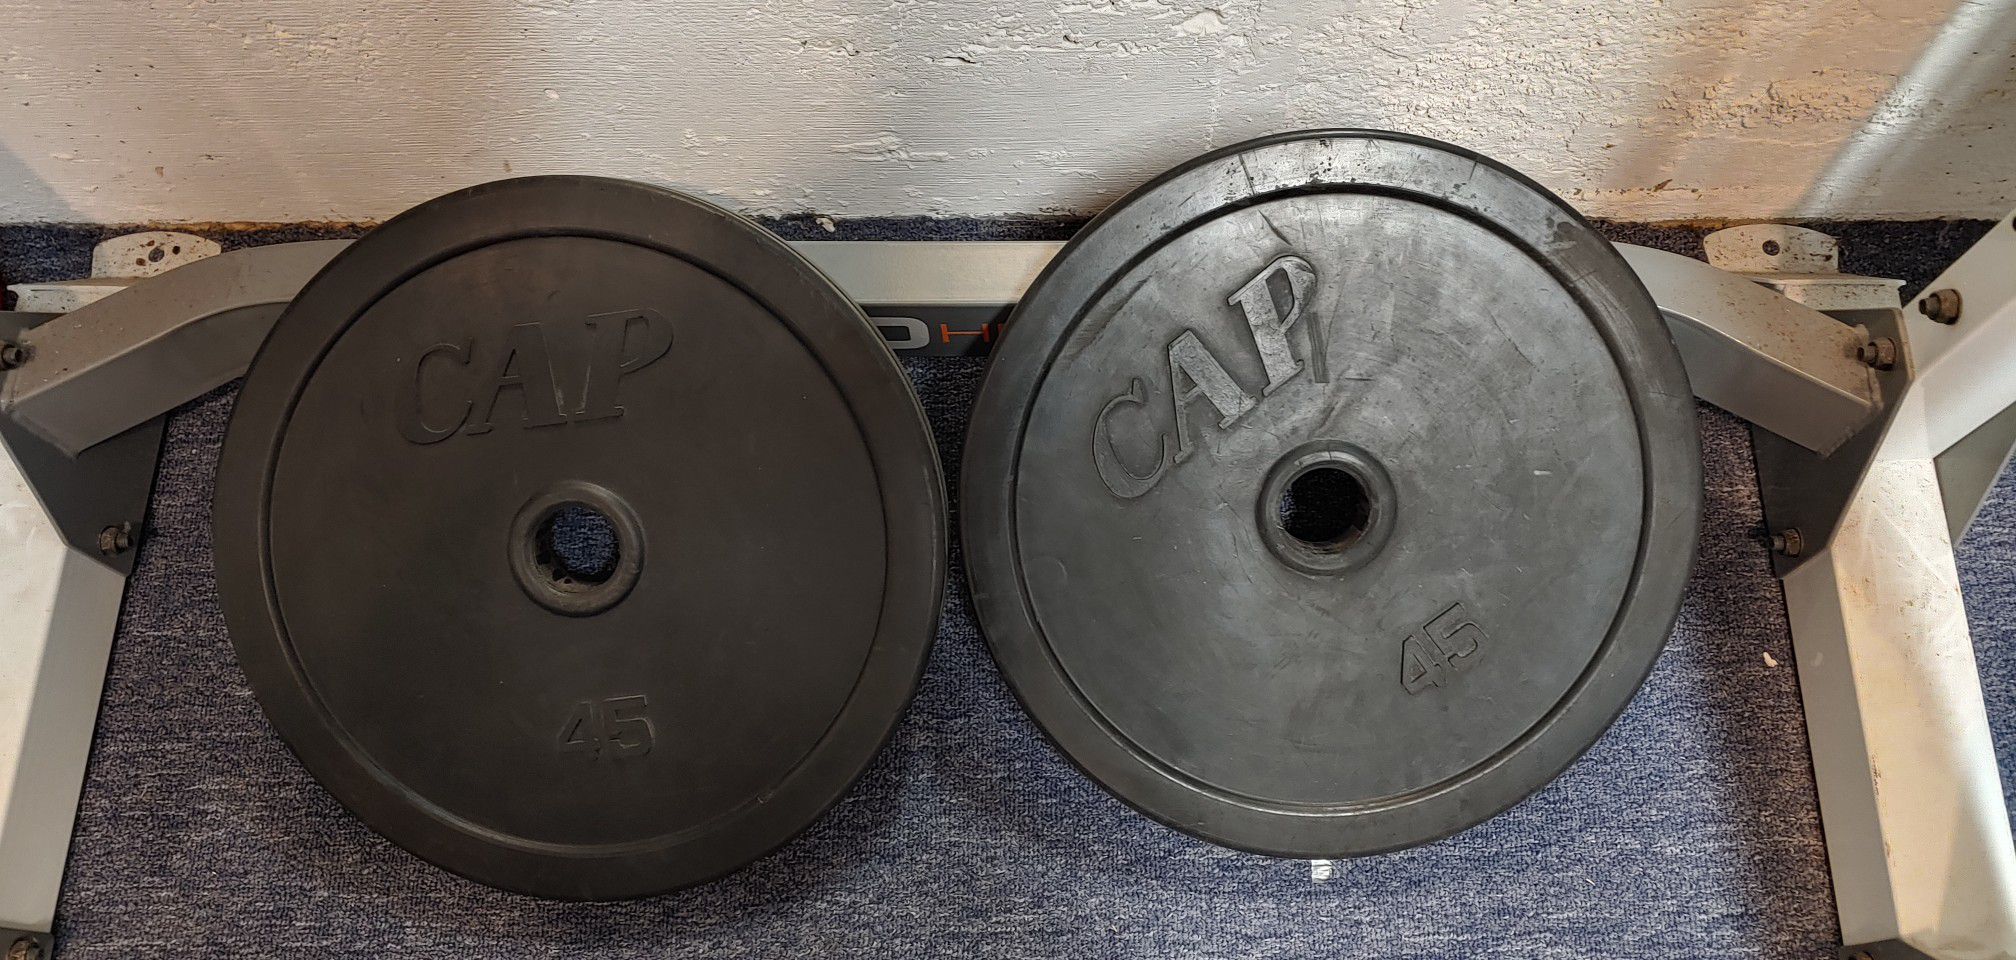 Two 45lb Olympic weight plate rubber encased bumper